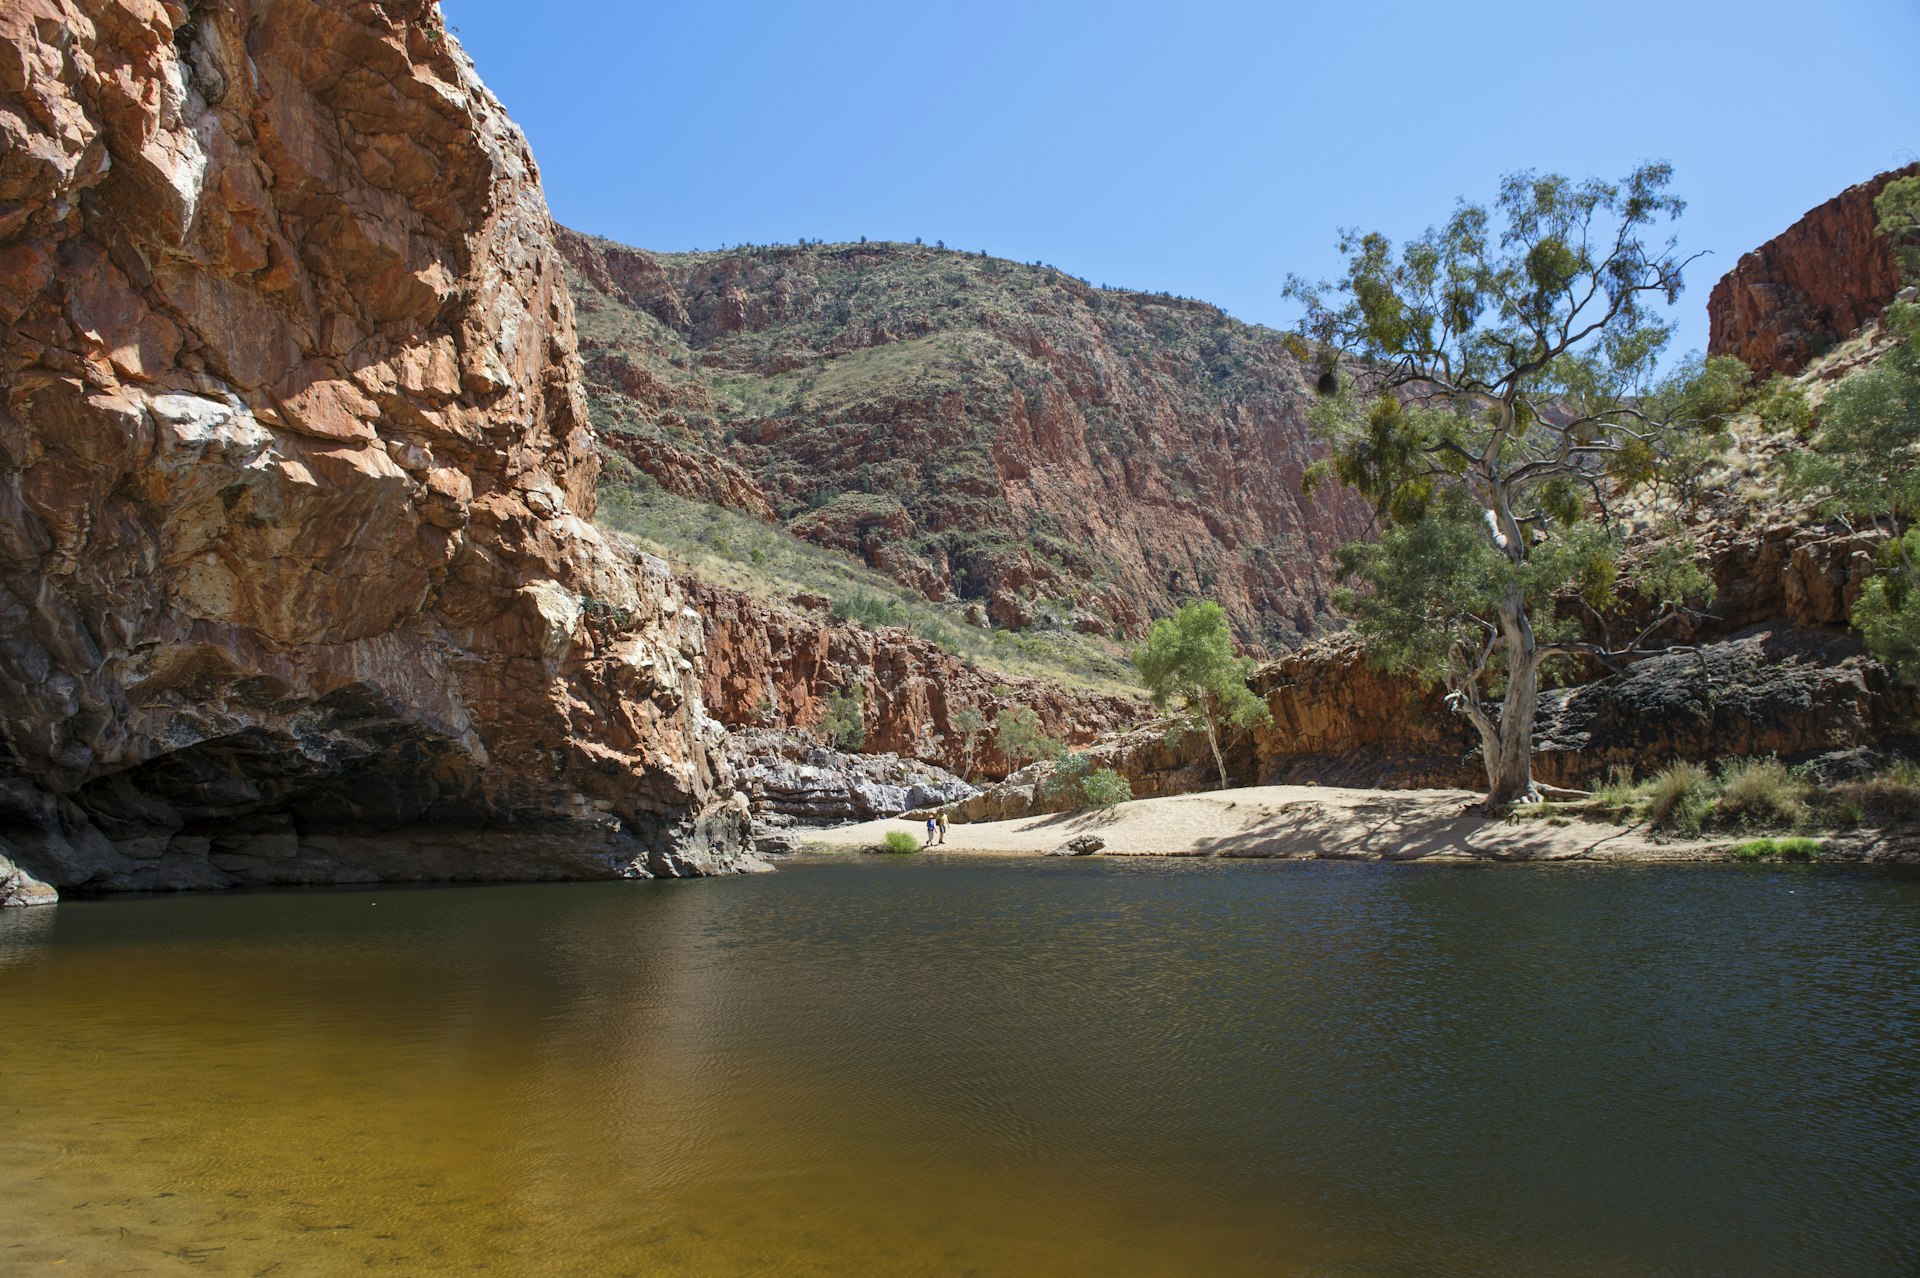 Ormiston Gorge, West MacDonnell National Park, Northern Territory. Pictured on a sunny day, the still body of water is surrounded by deep red sands and earth. Two people are walking away from the waters edge. There is blue sky and a few sparse trees in the background.